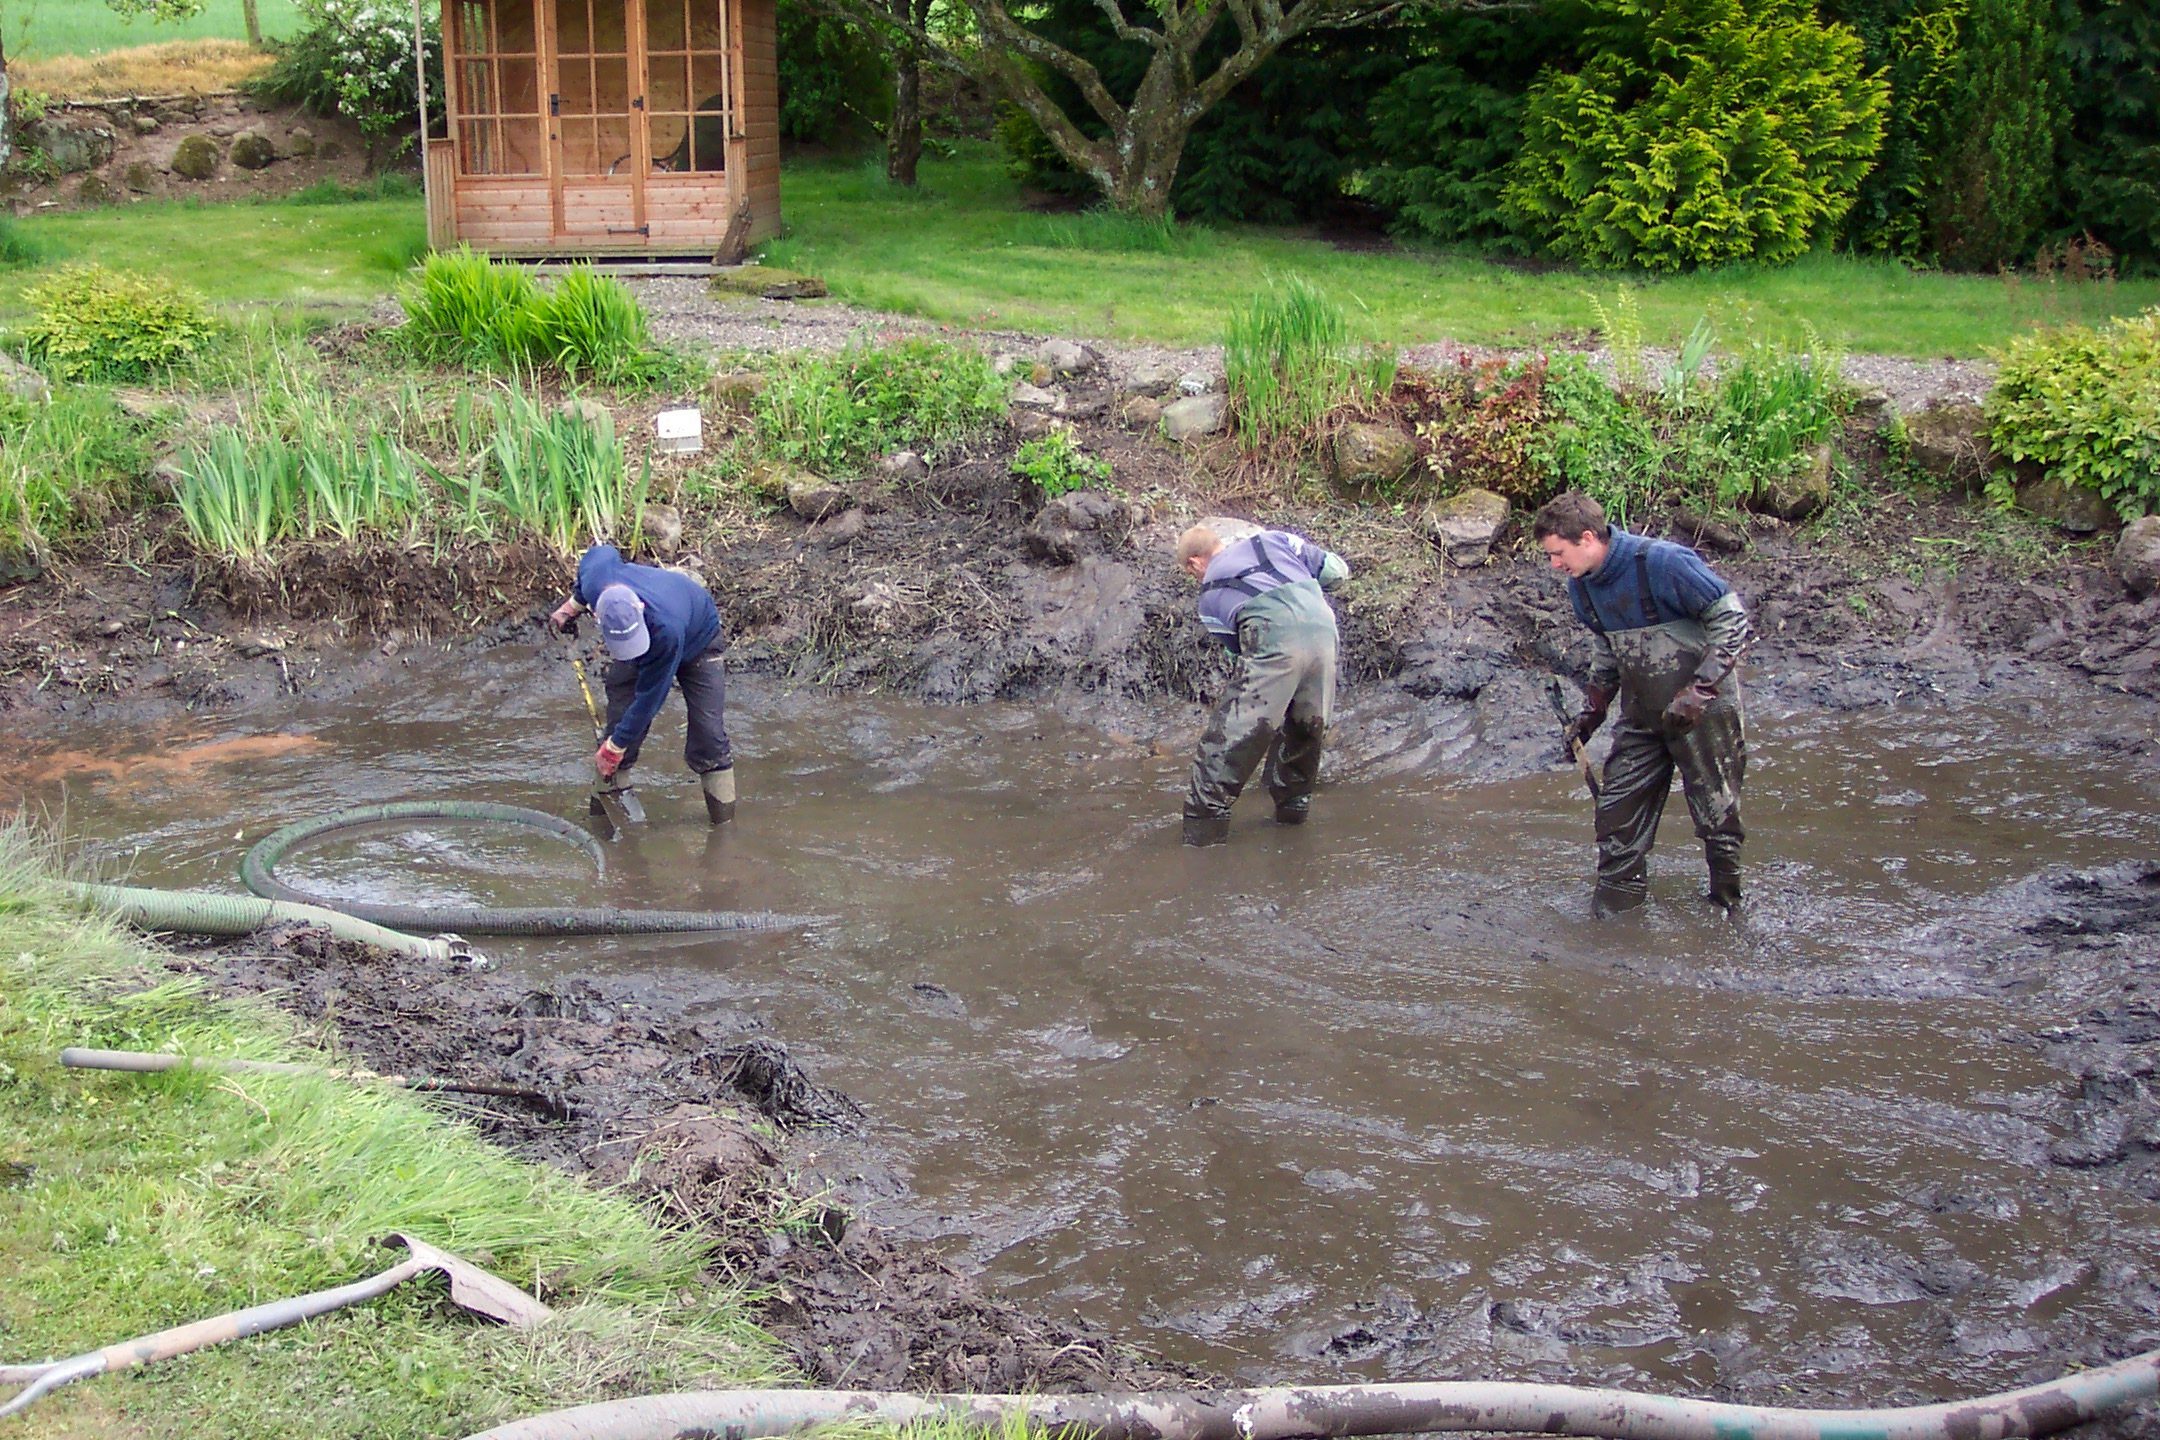 Pond cleaning on a grand scale, plenty of silt here!